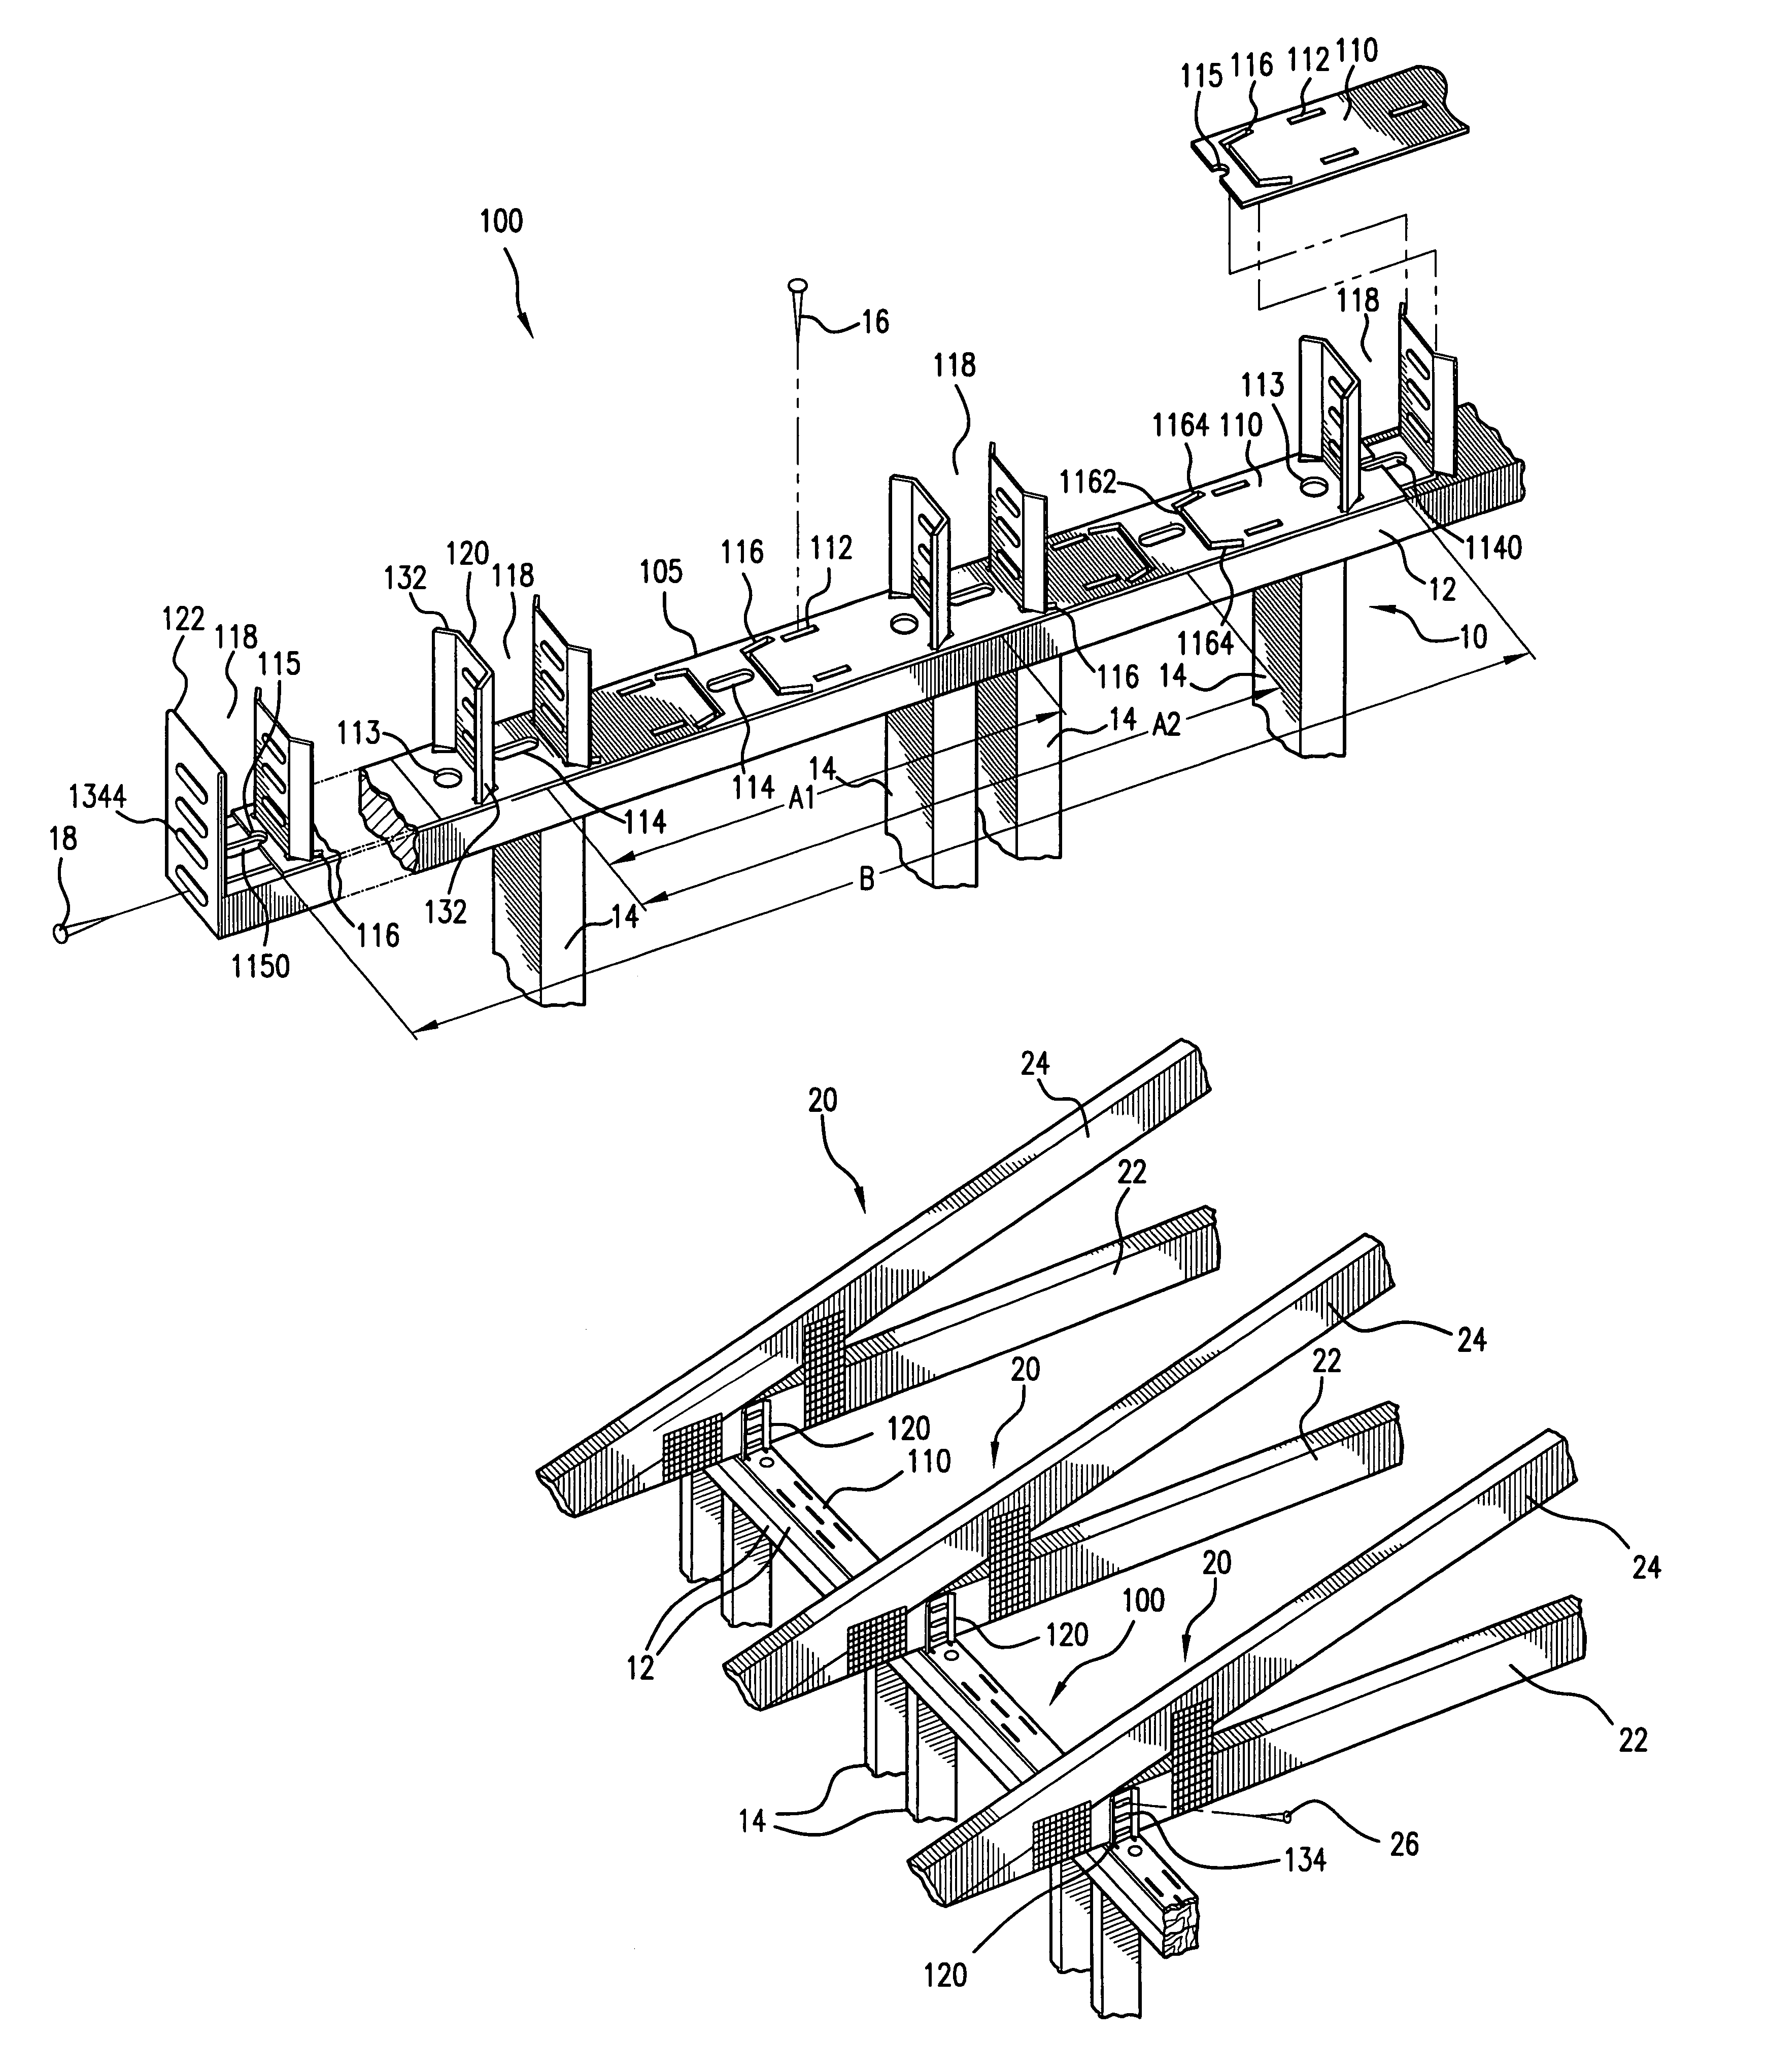 Universal structural member support and positioning system